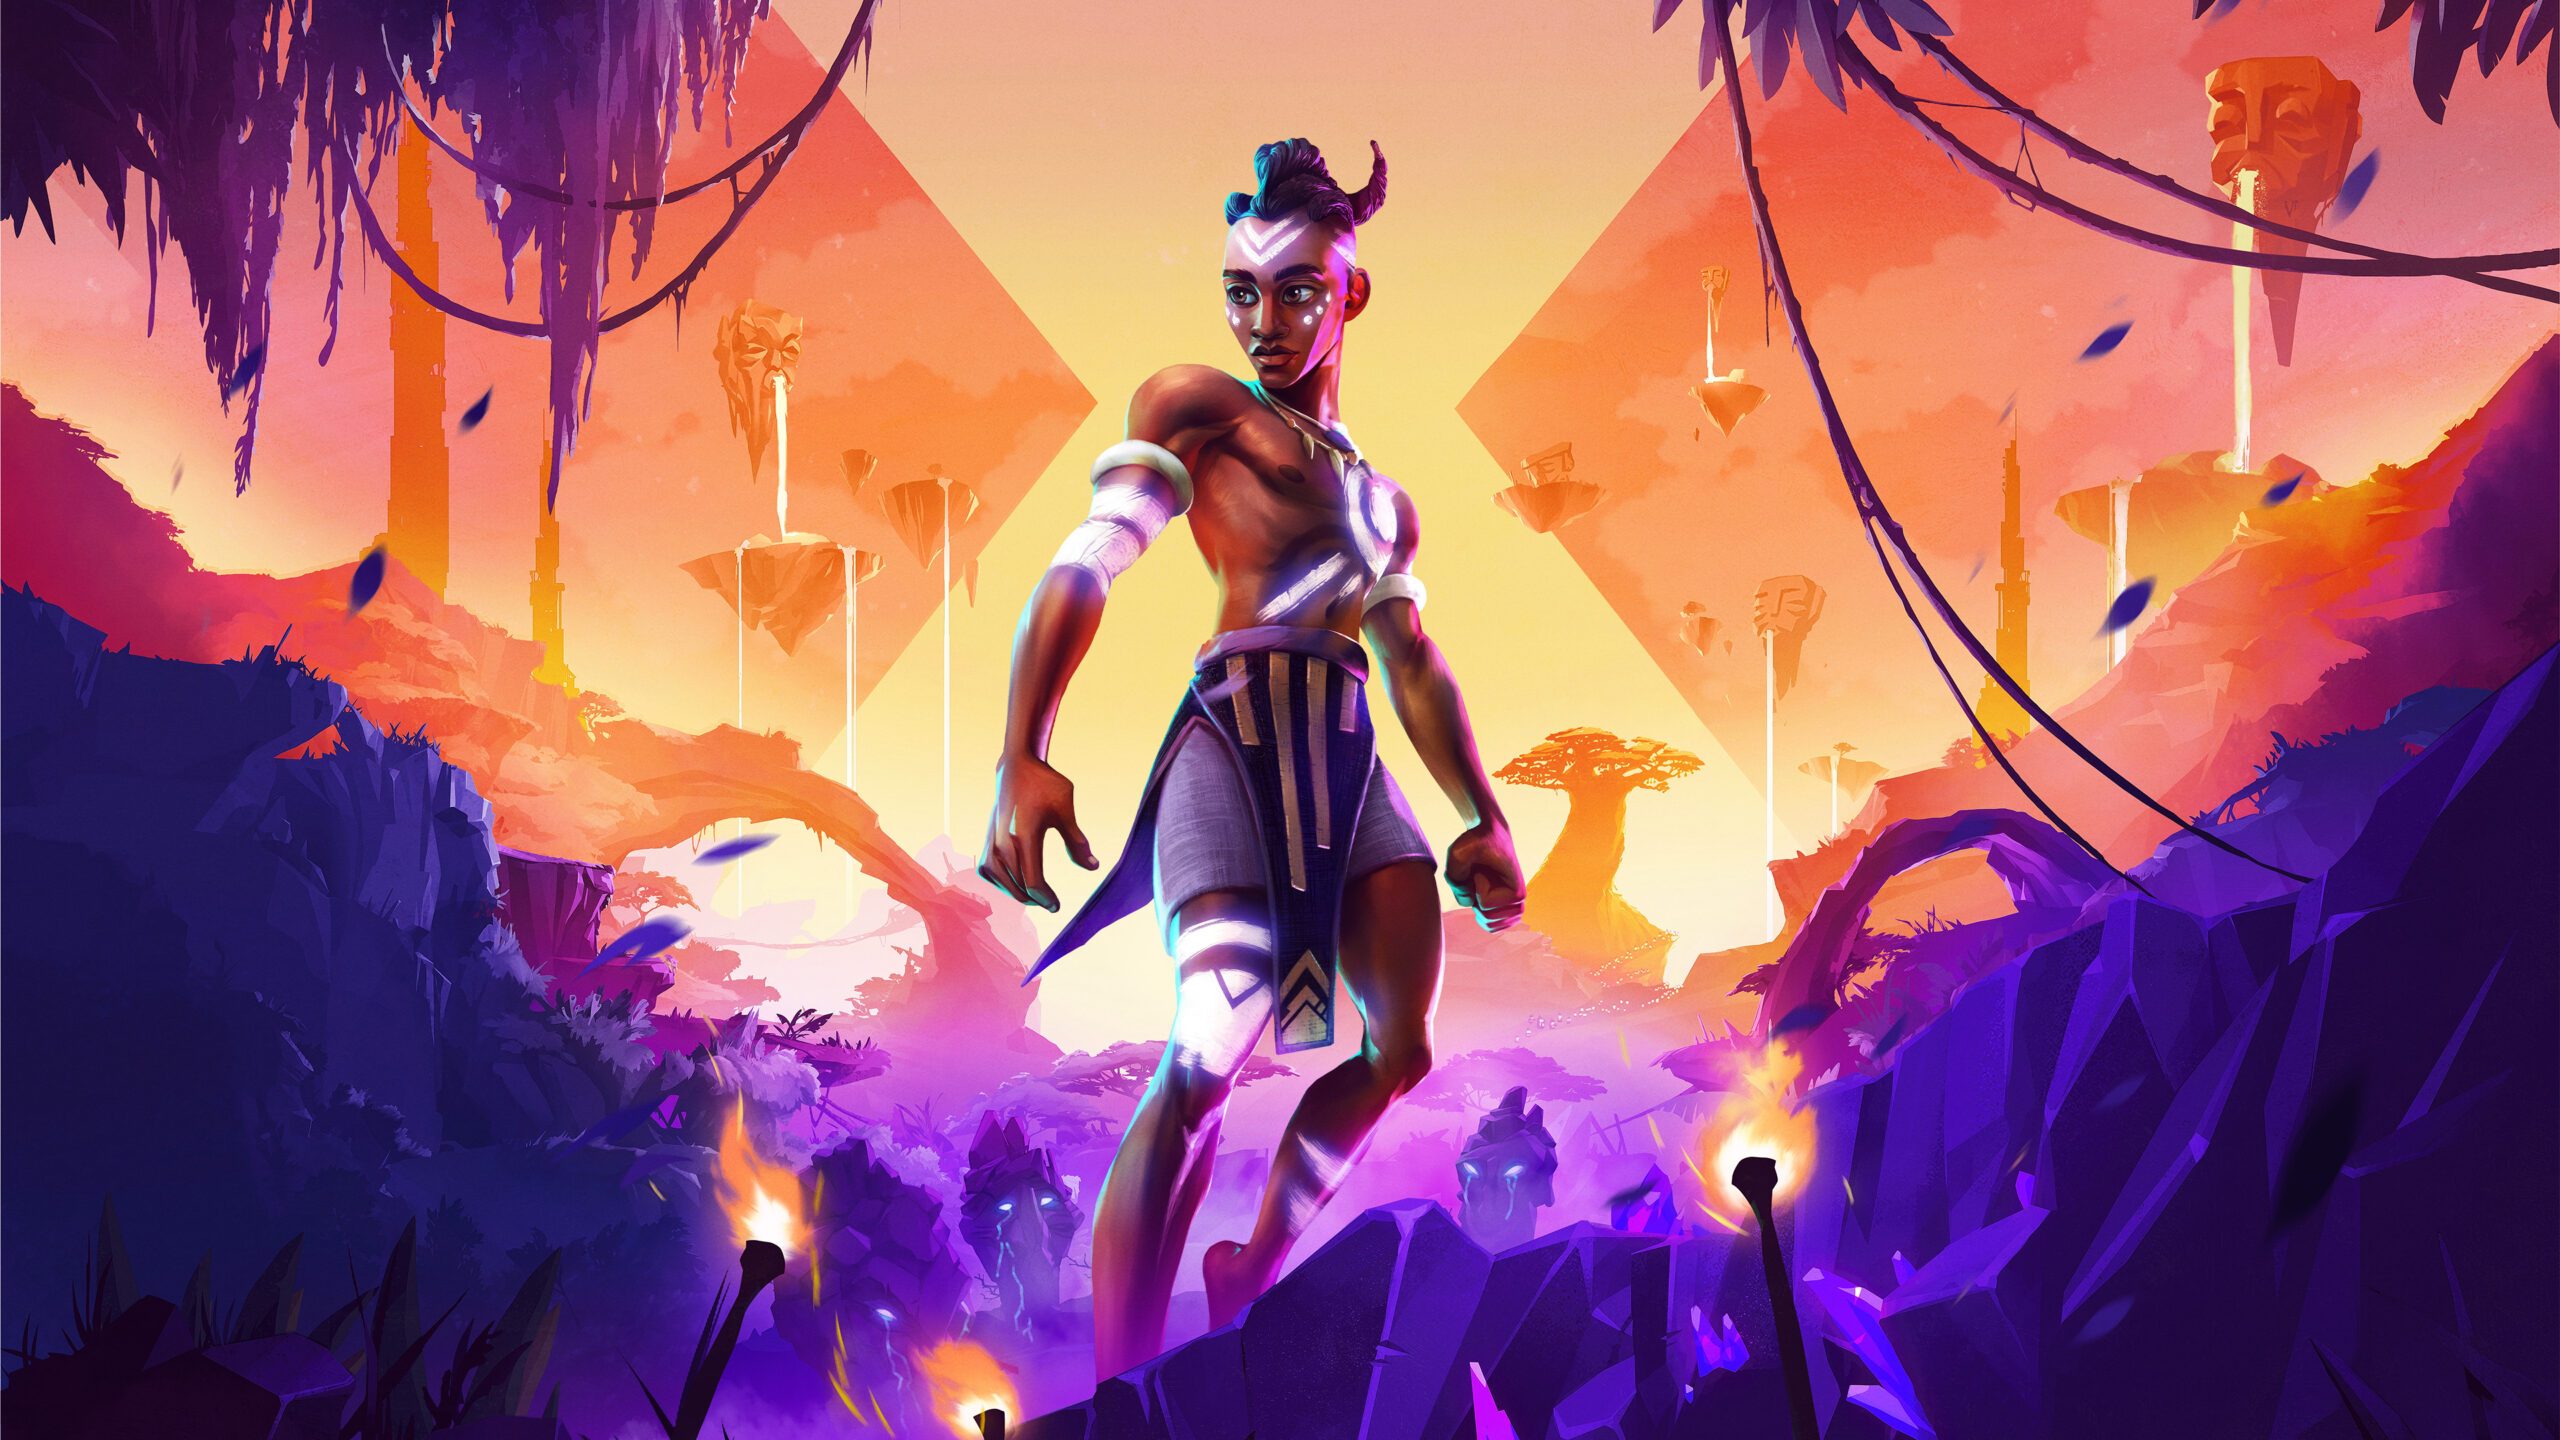 Wield the dance of the Shaman in a gorgeous story-driven action-exploration game inspired by Bantu tales.